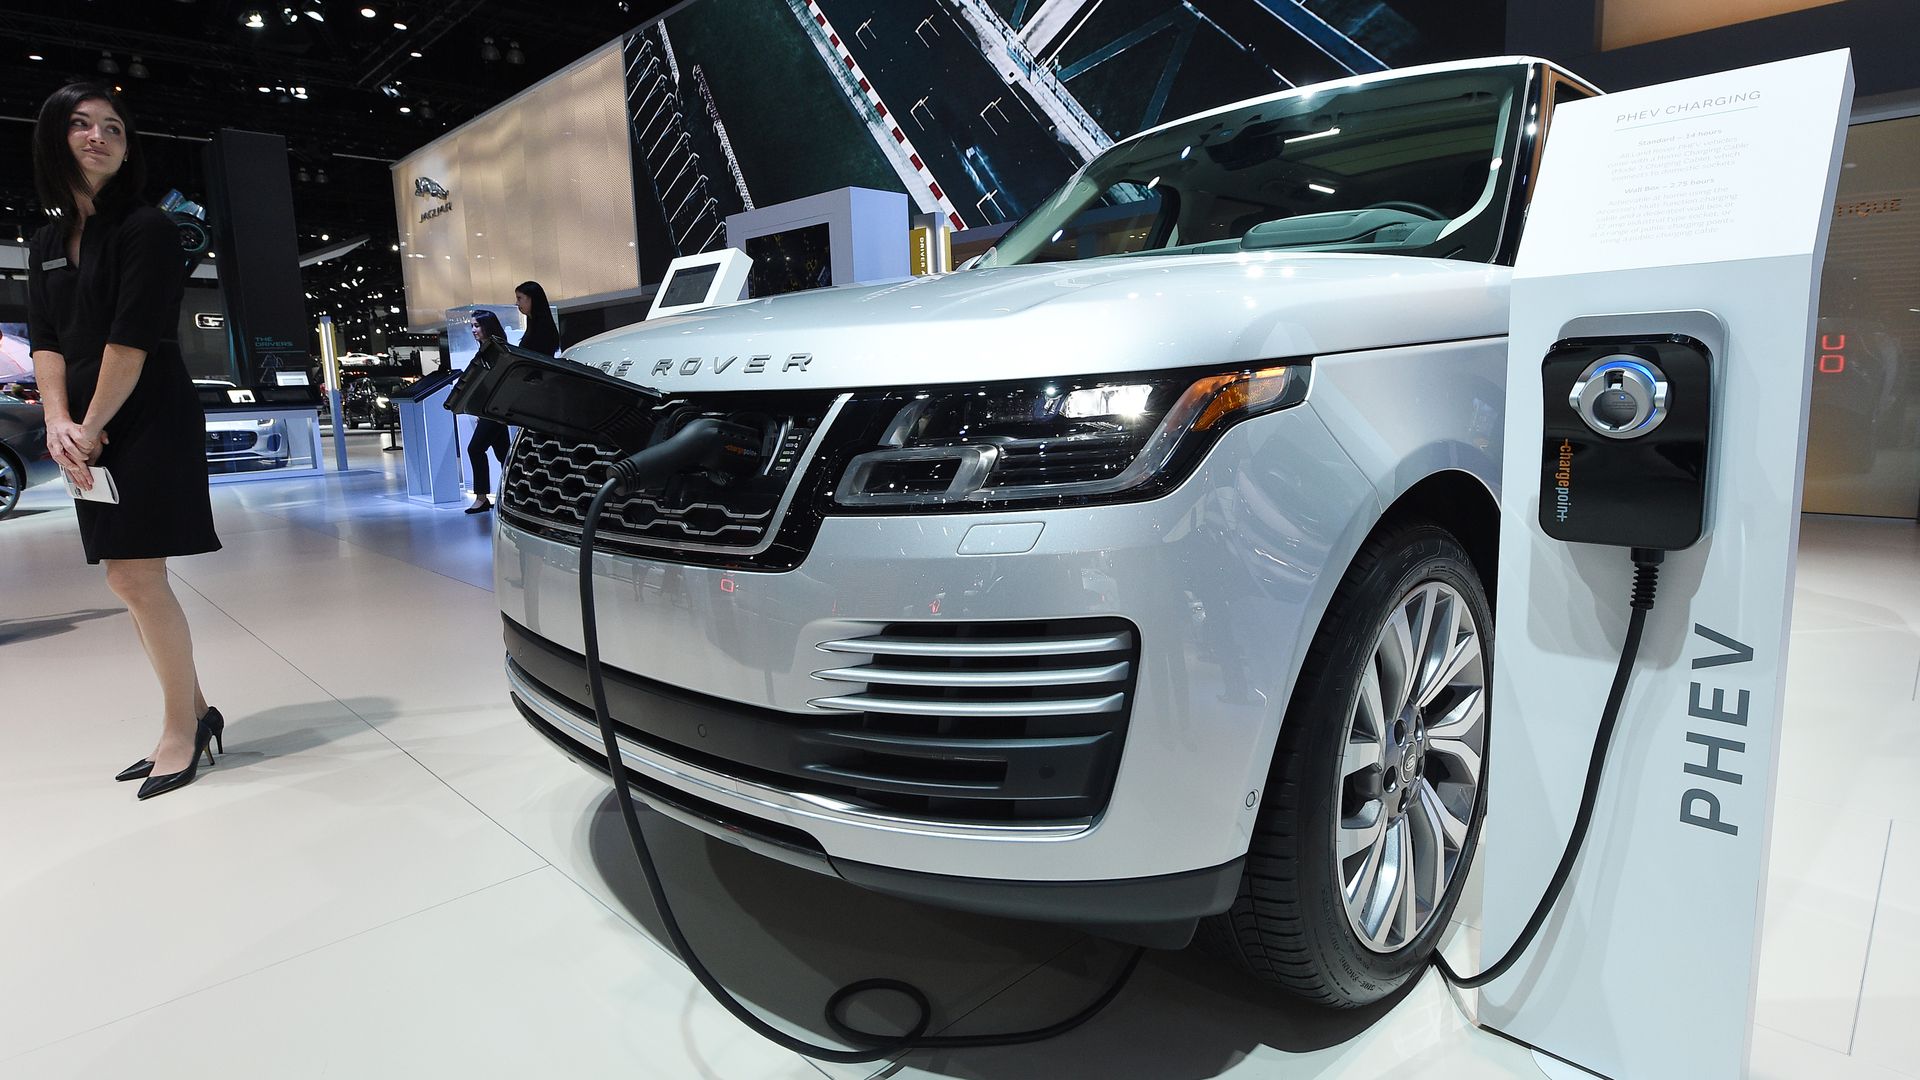 Hybrid Range Rover model and charging station at car show